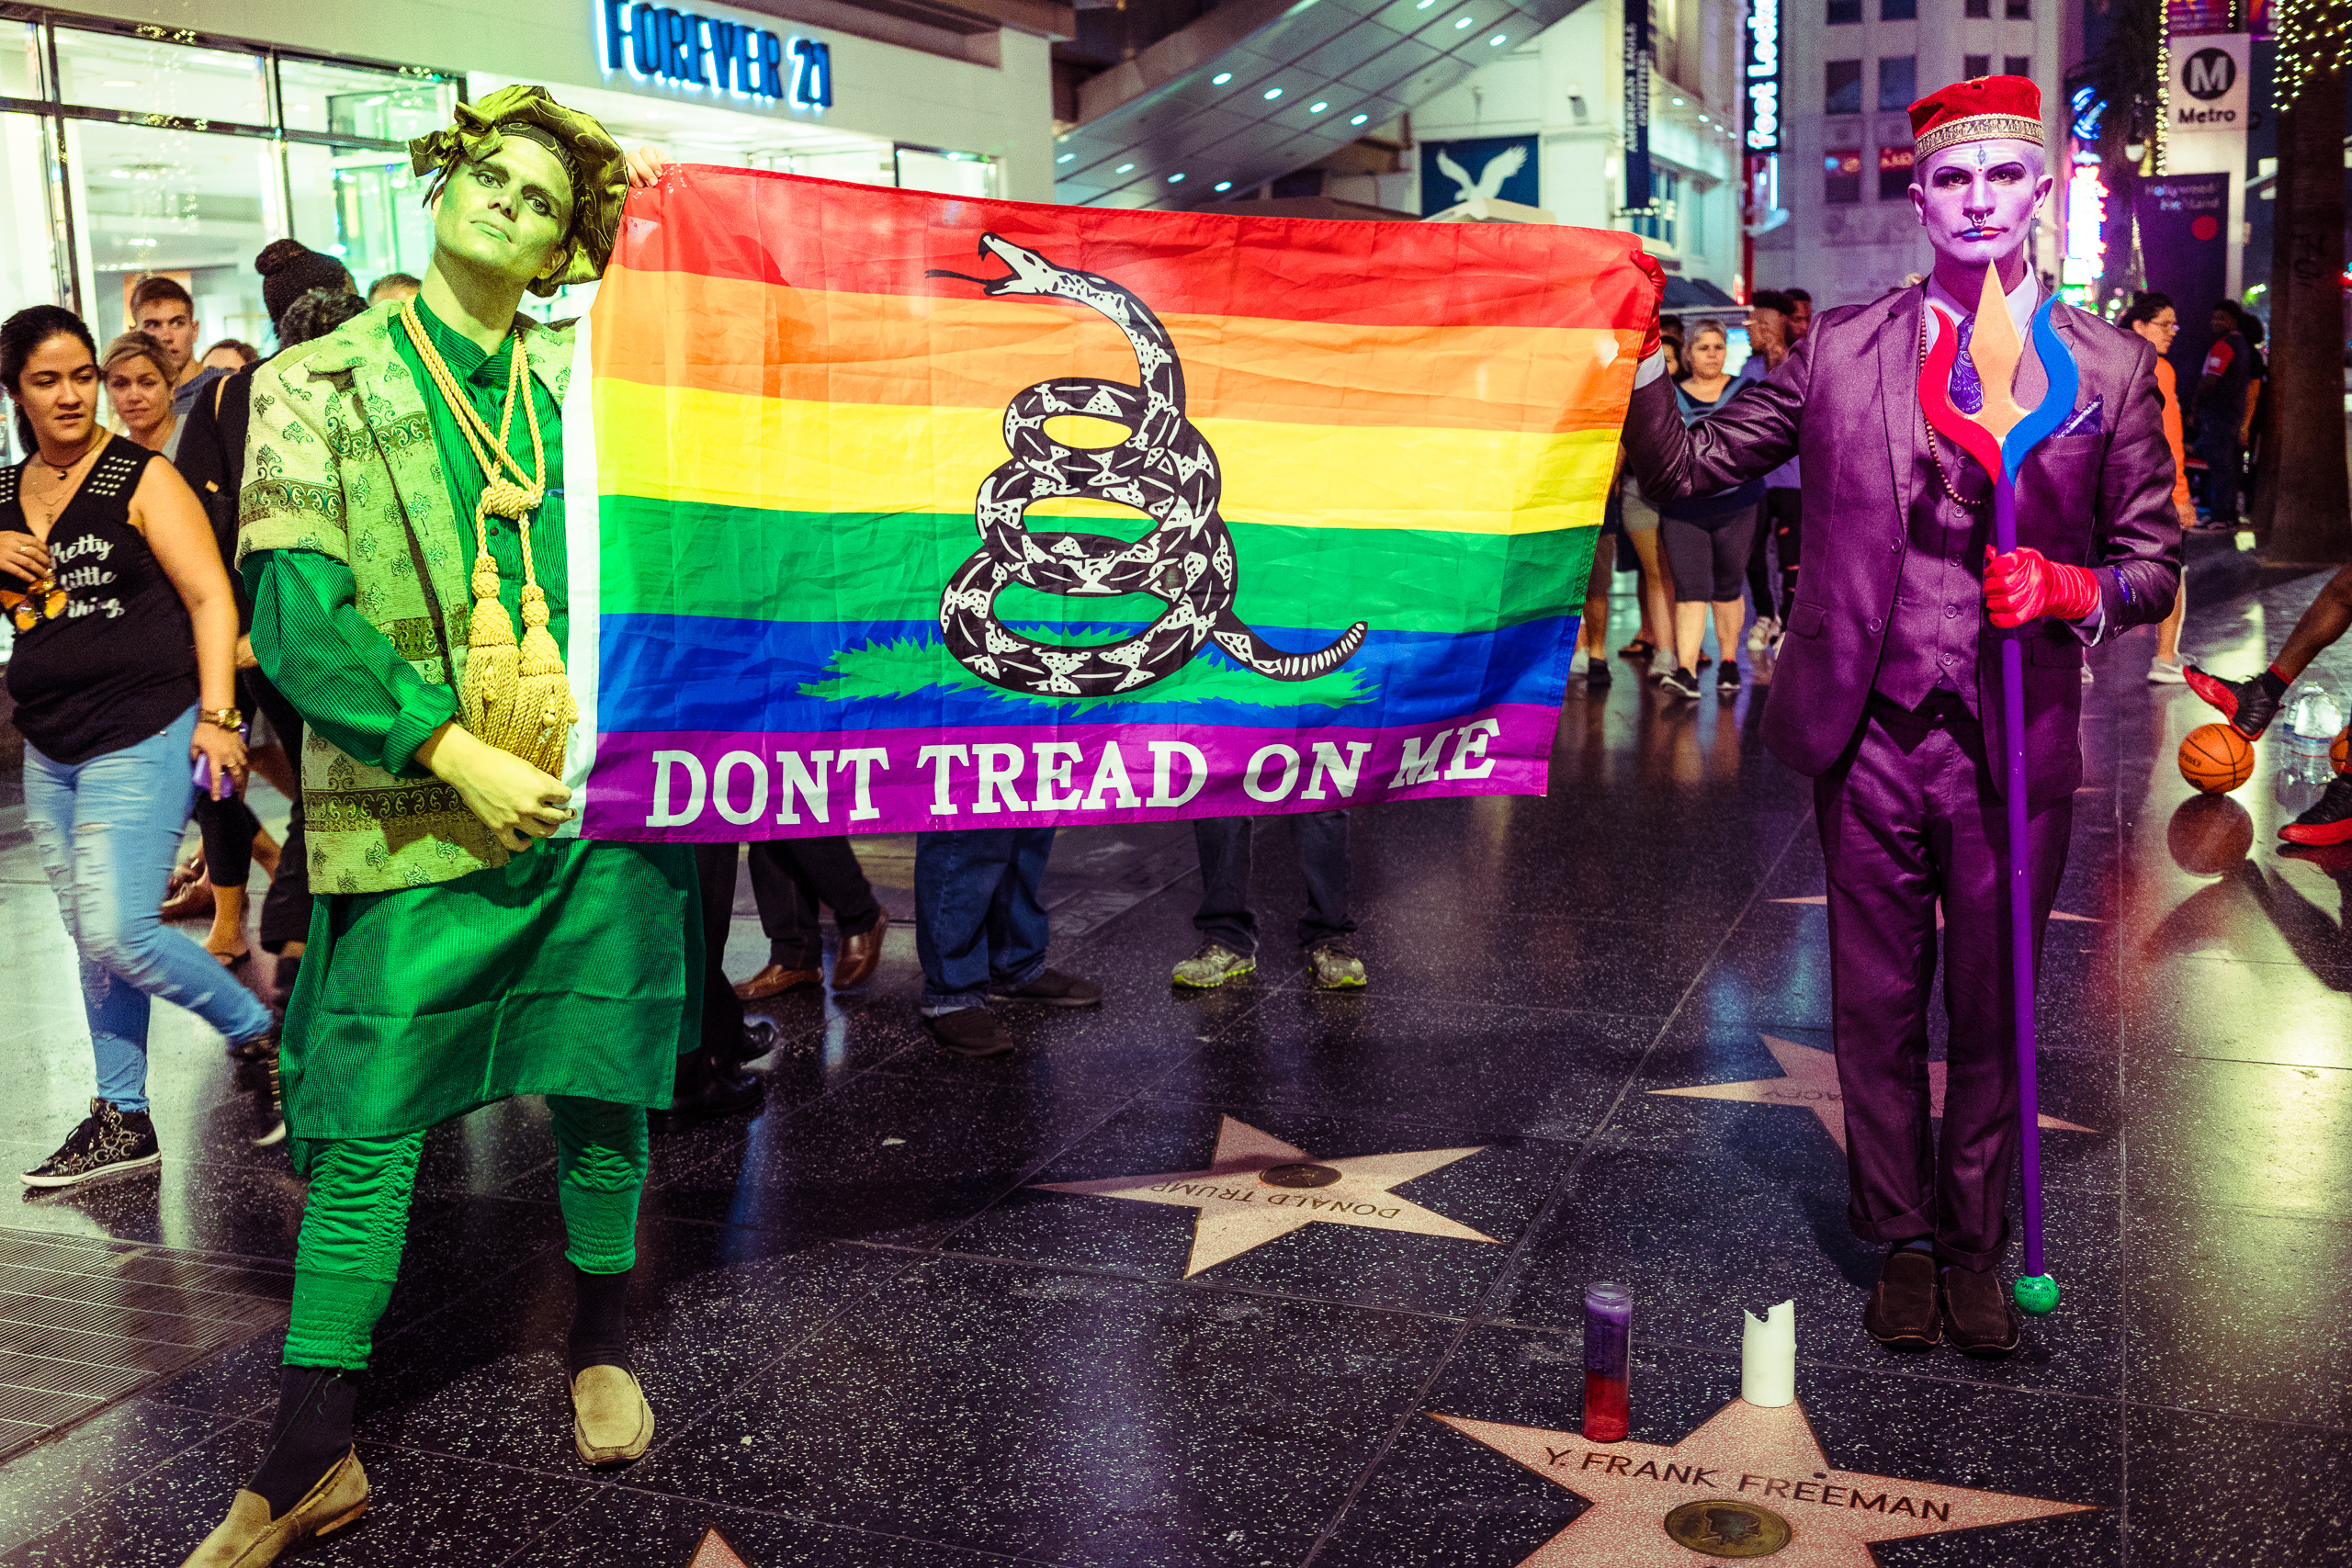 Activities at Donald Trump's Star on Hollywood Boulevard on Saturday 8 September 2018, featuring a Purple Party performance, "Shiva NonDuality Mantras @ Hollywood Trump Star"